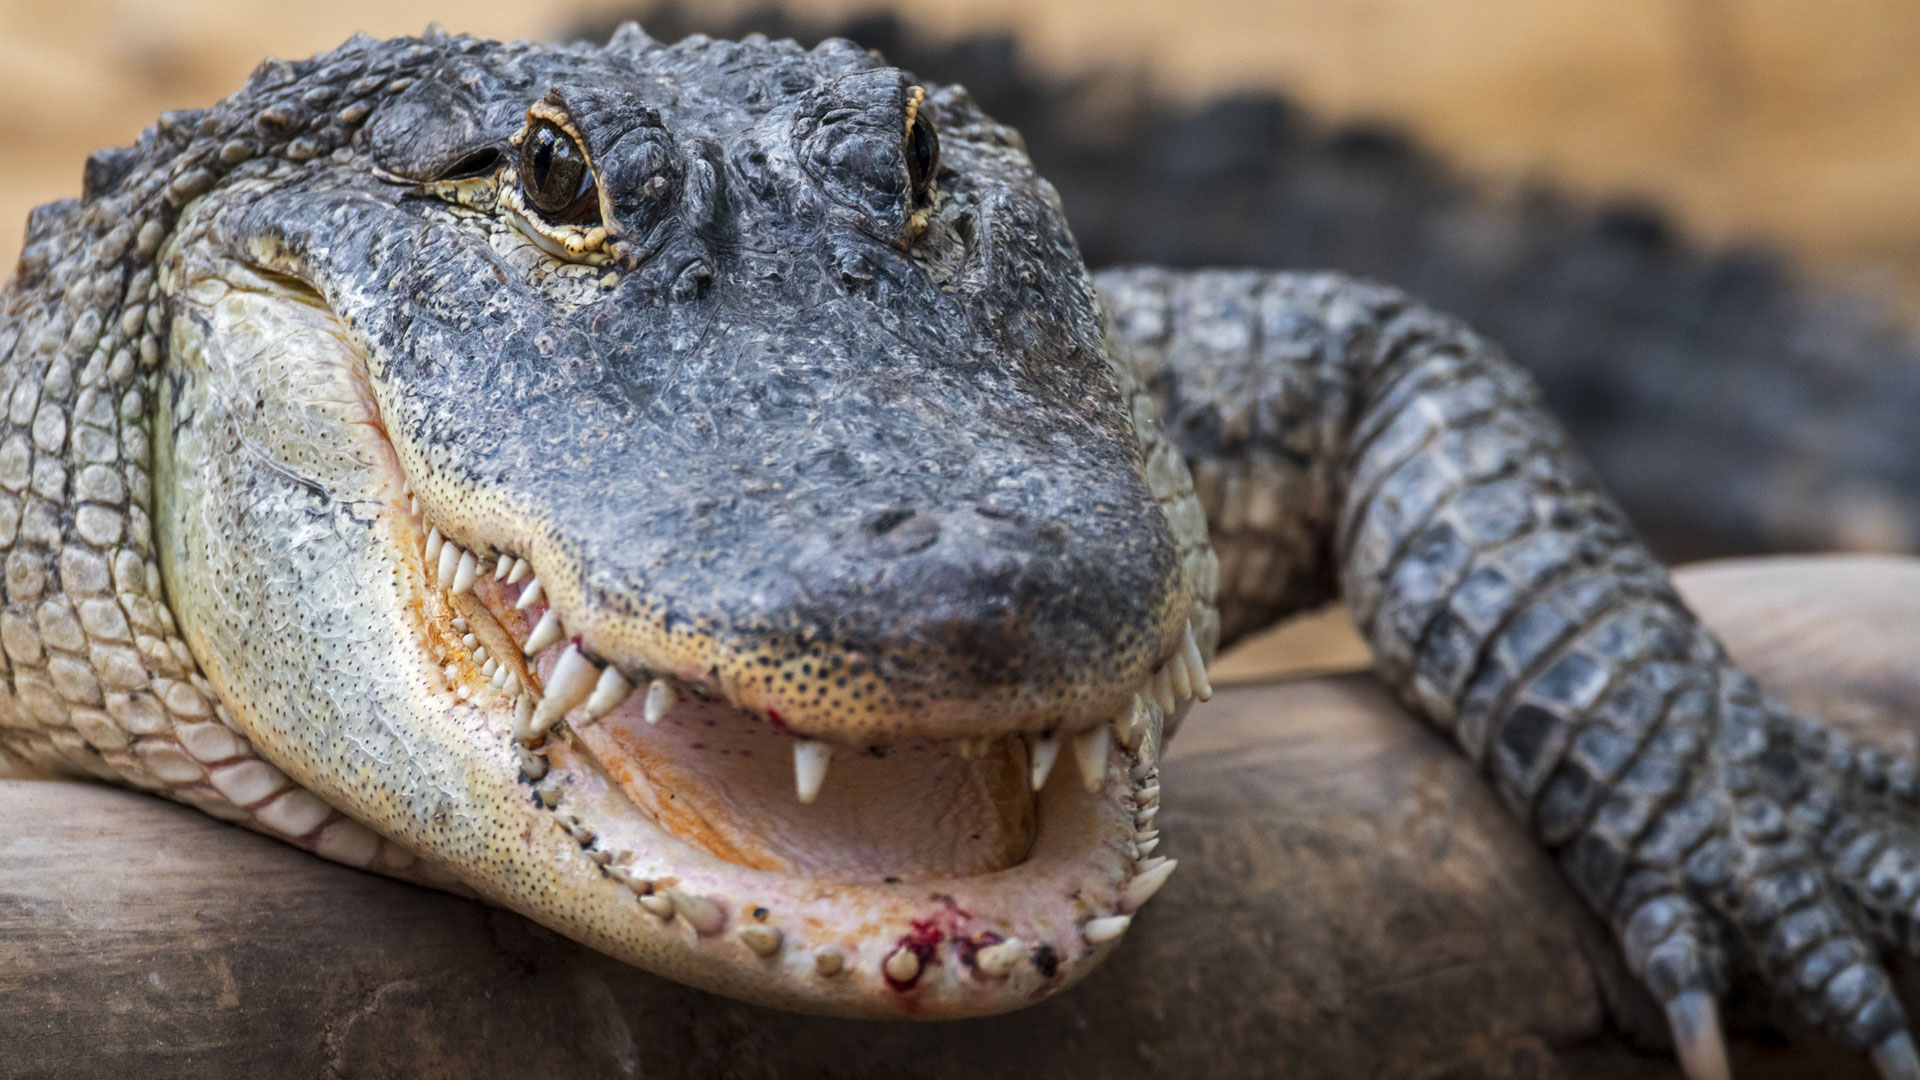 Florida Man Survives Alligator Attack by Shoving His Fingers In Its Eyes